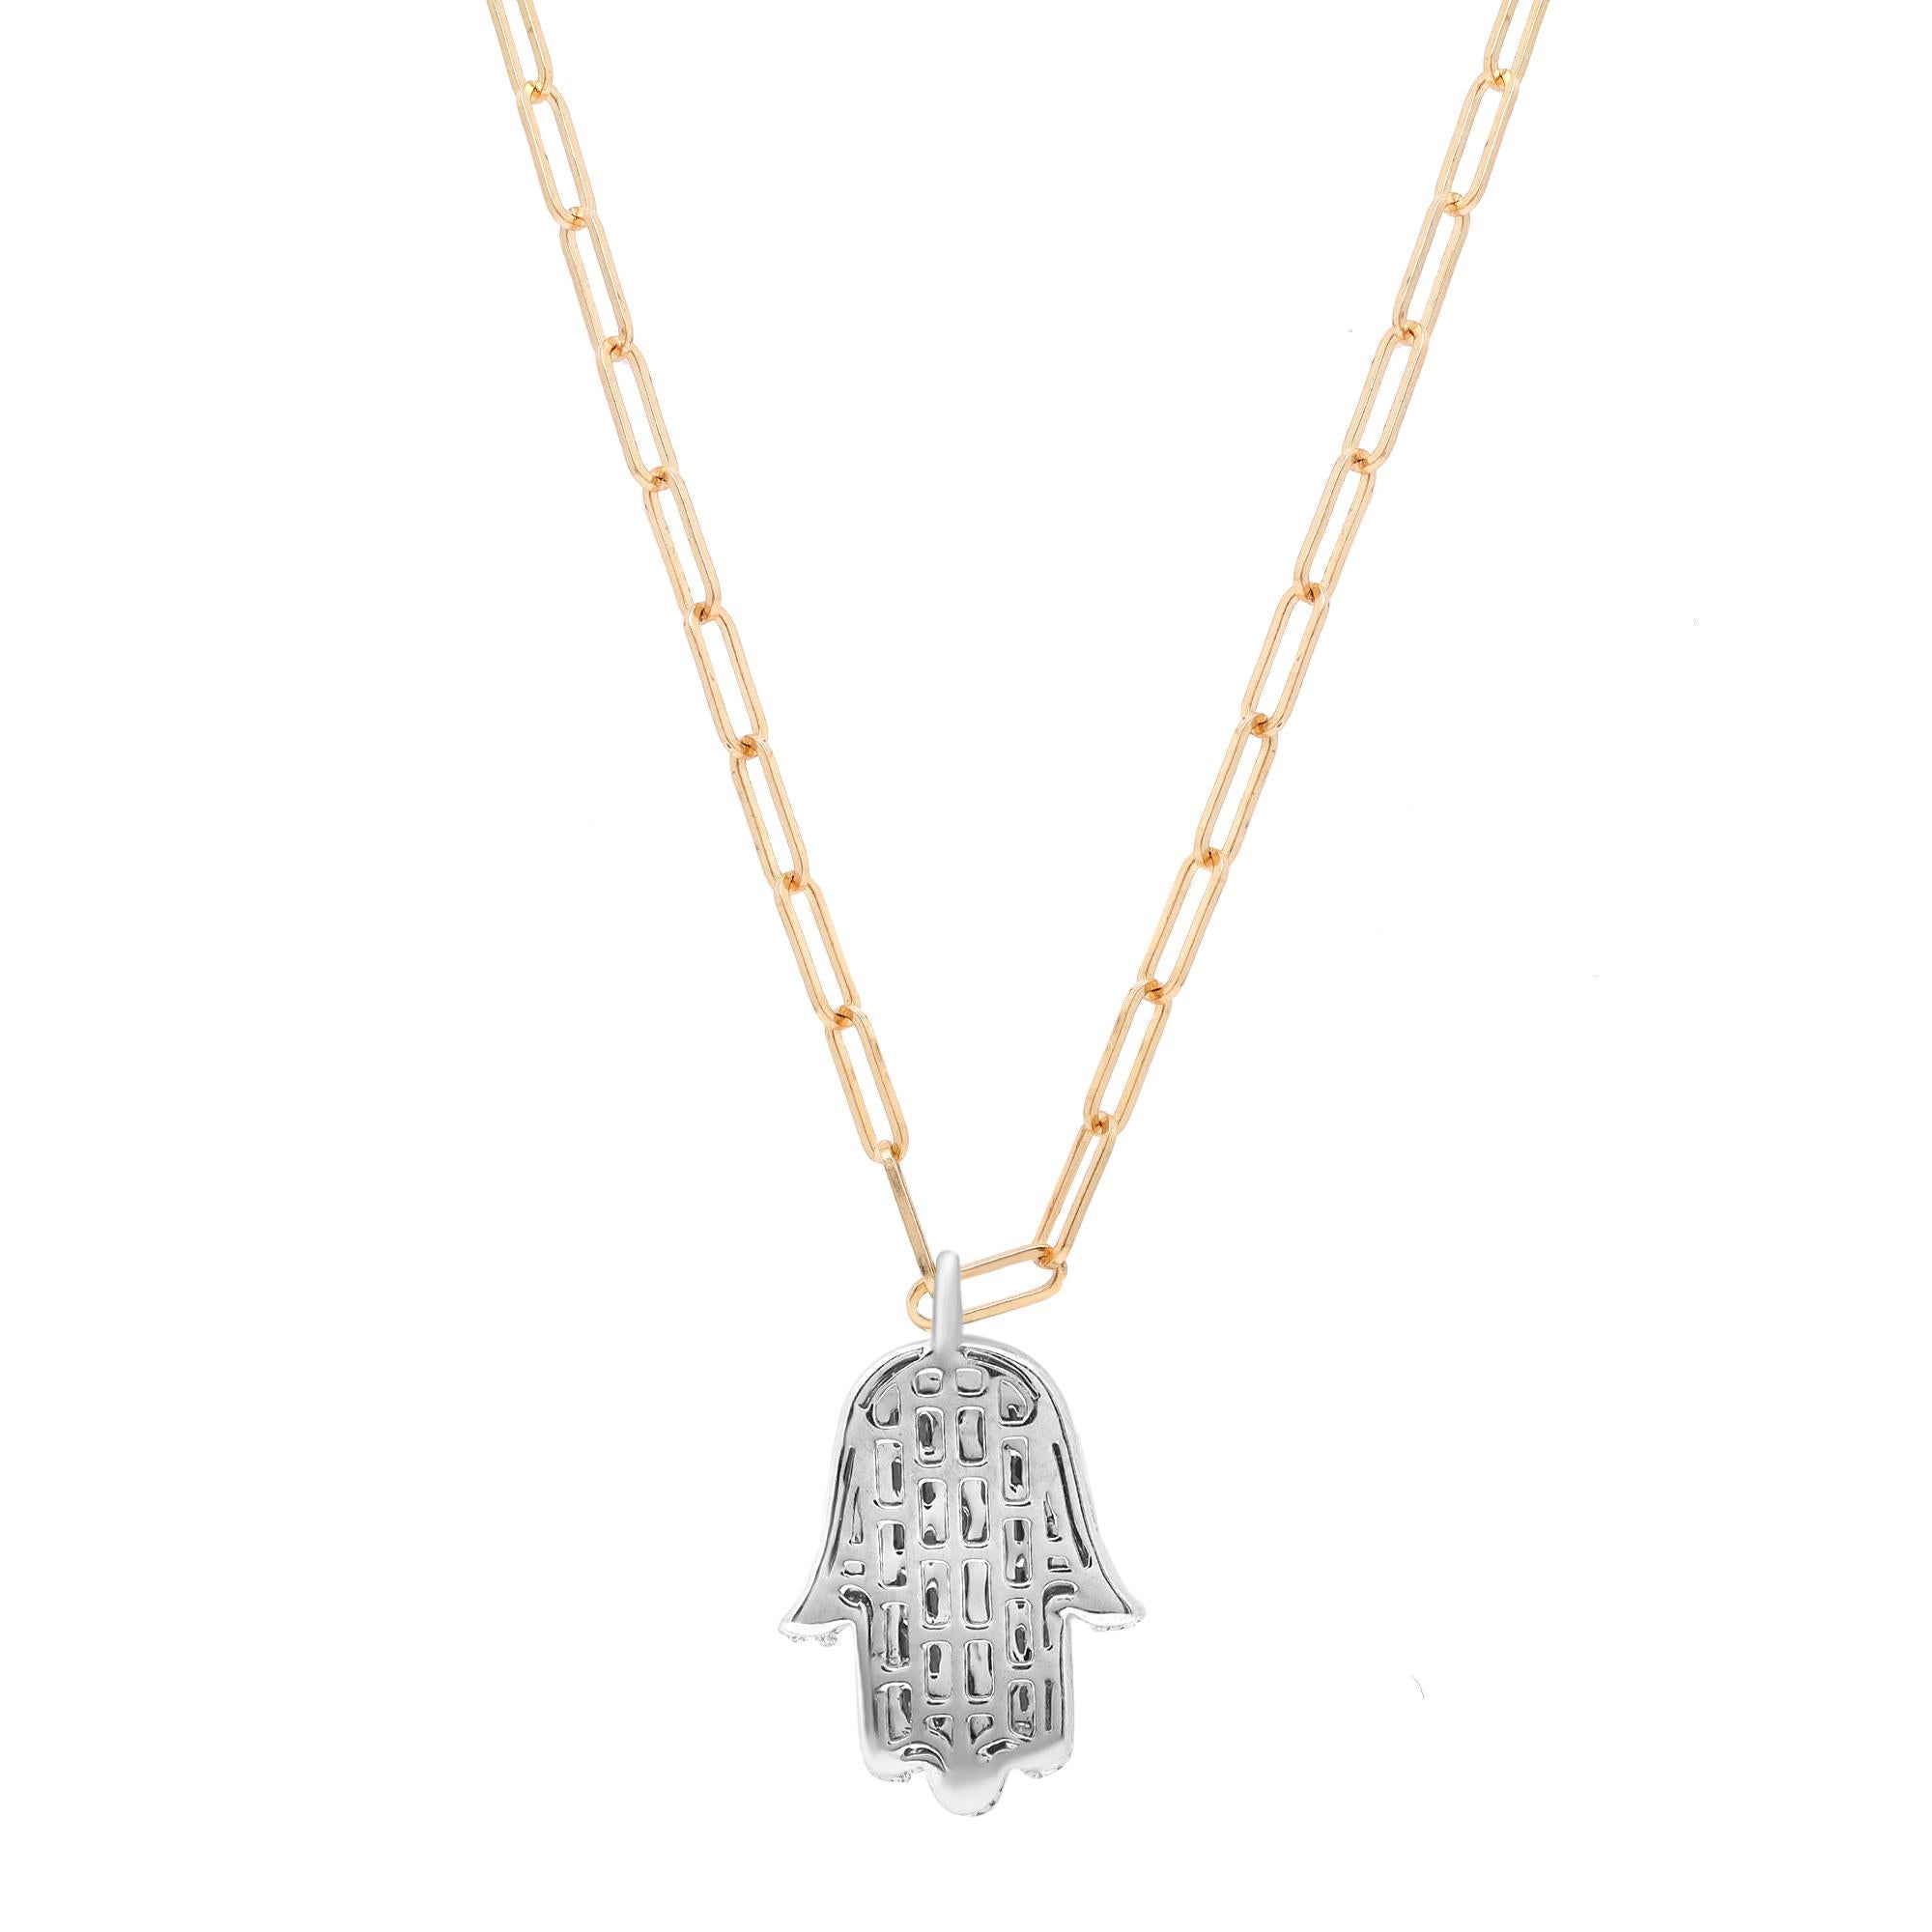 This majestic Hamsa pendant necklace features prong set Baguette cut diamonds with an outline of round brilliant cut diamonds. Total diamond weight: 0.59 carat. The pendant is crafted in 14K white gold and the paperclip link chain comes in 14K